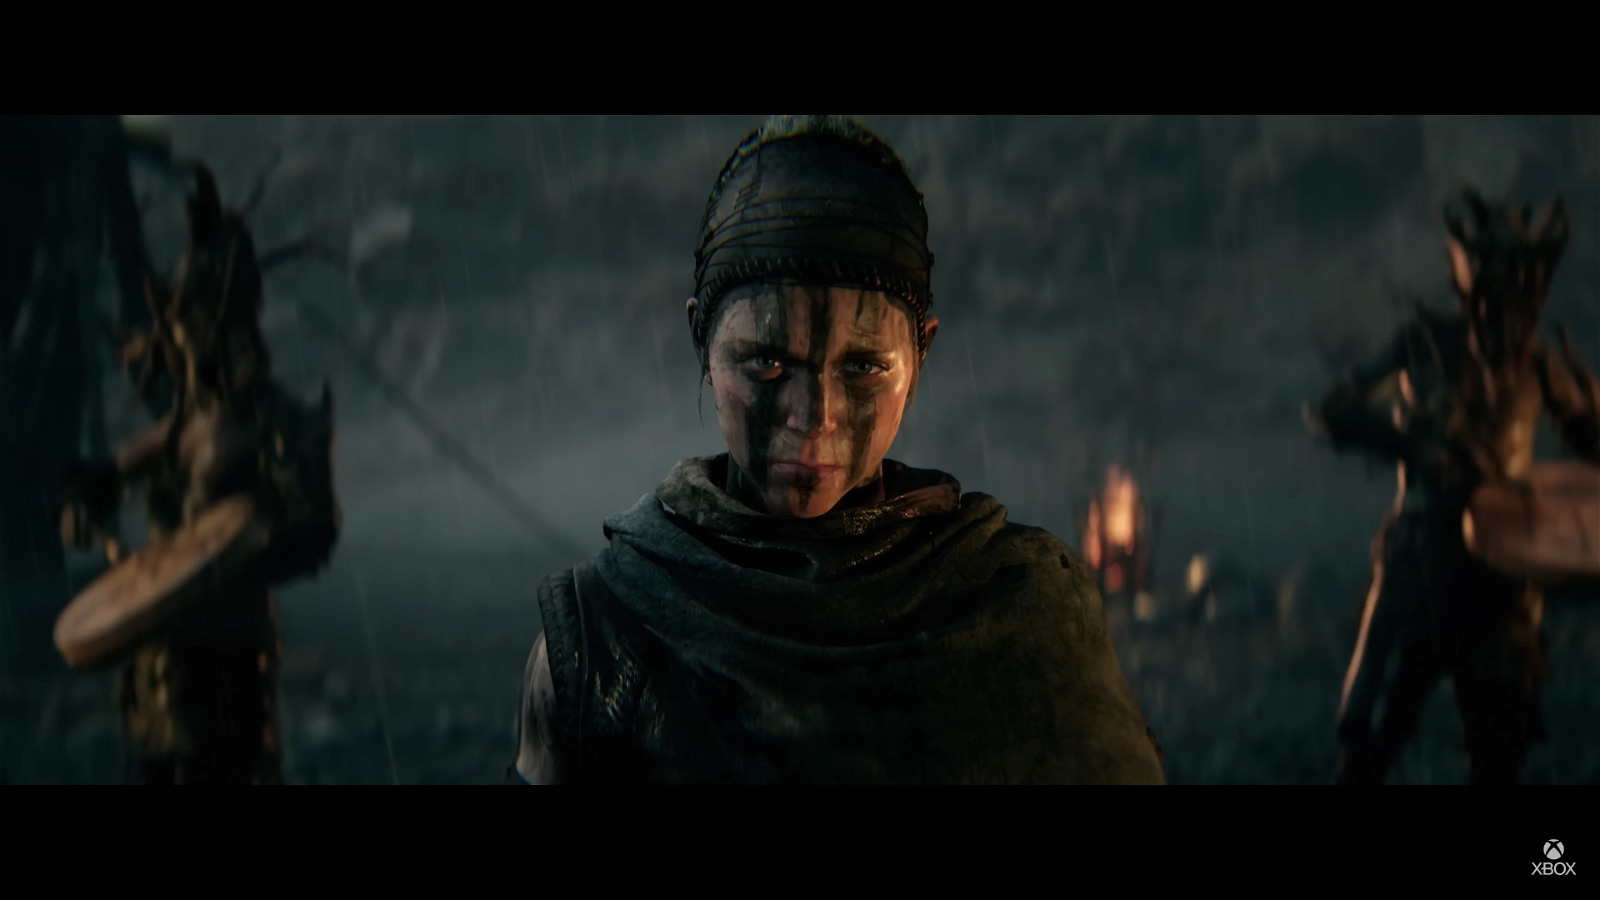 Hellblade 2 goes for a dark and gritty atmosphere.